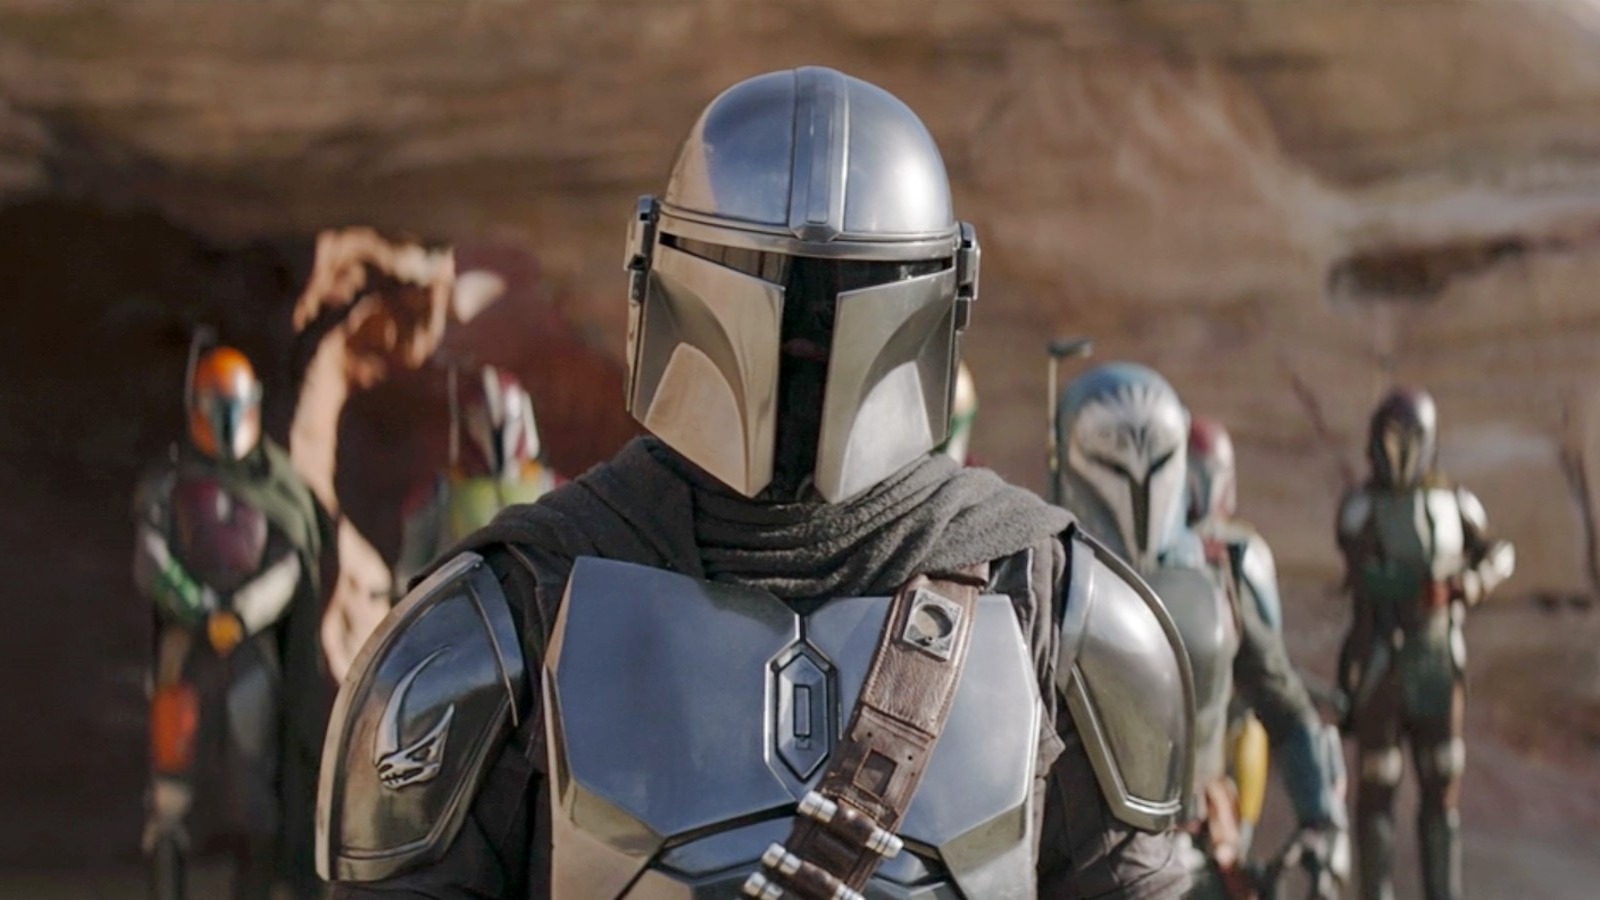 The Mandalorian has forgotten what made us fall in love with it in